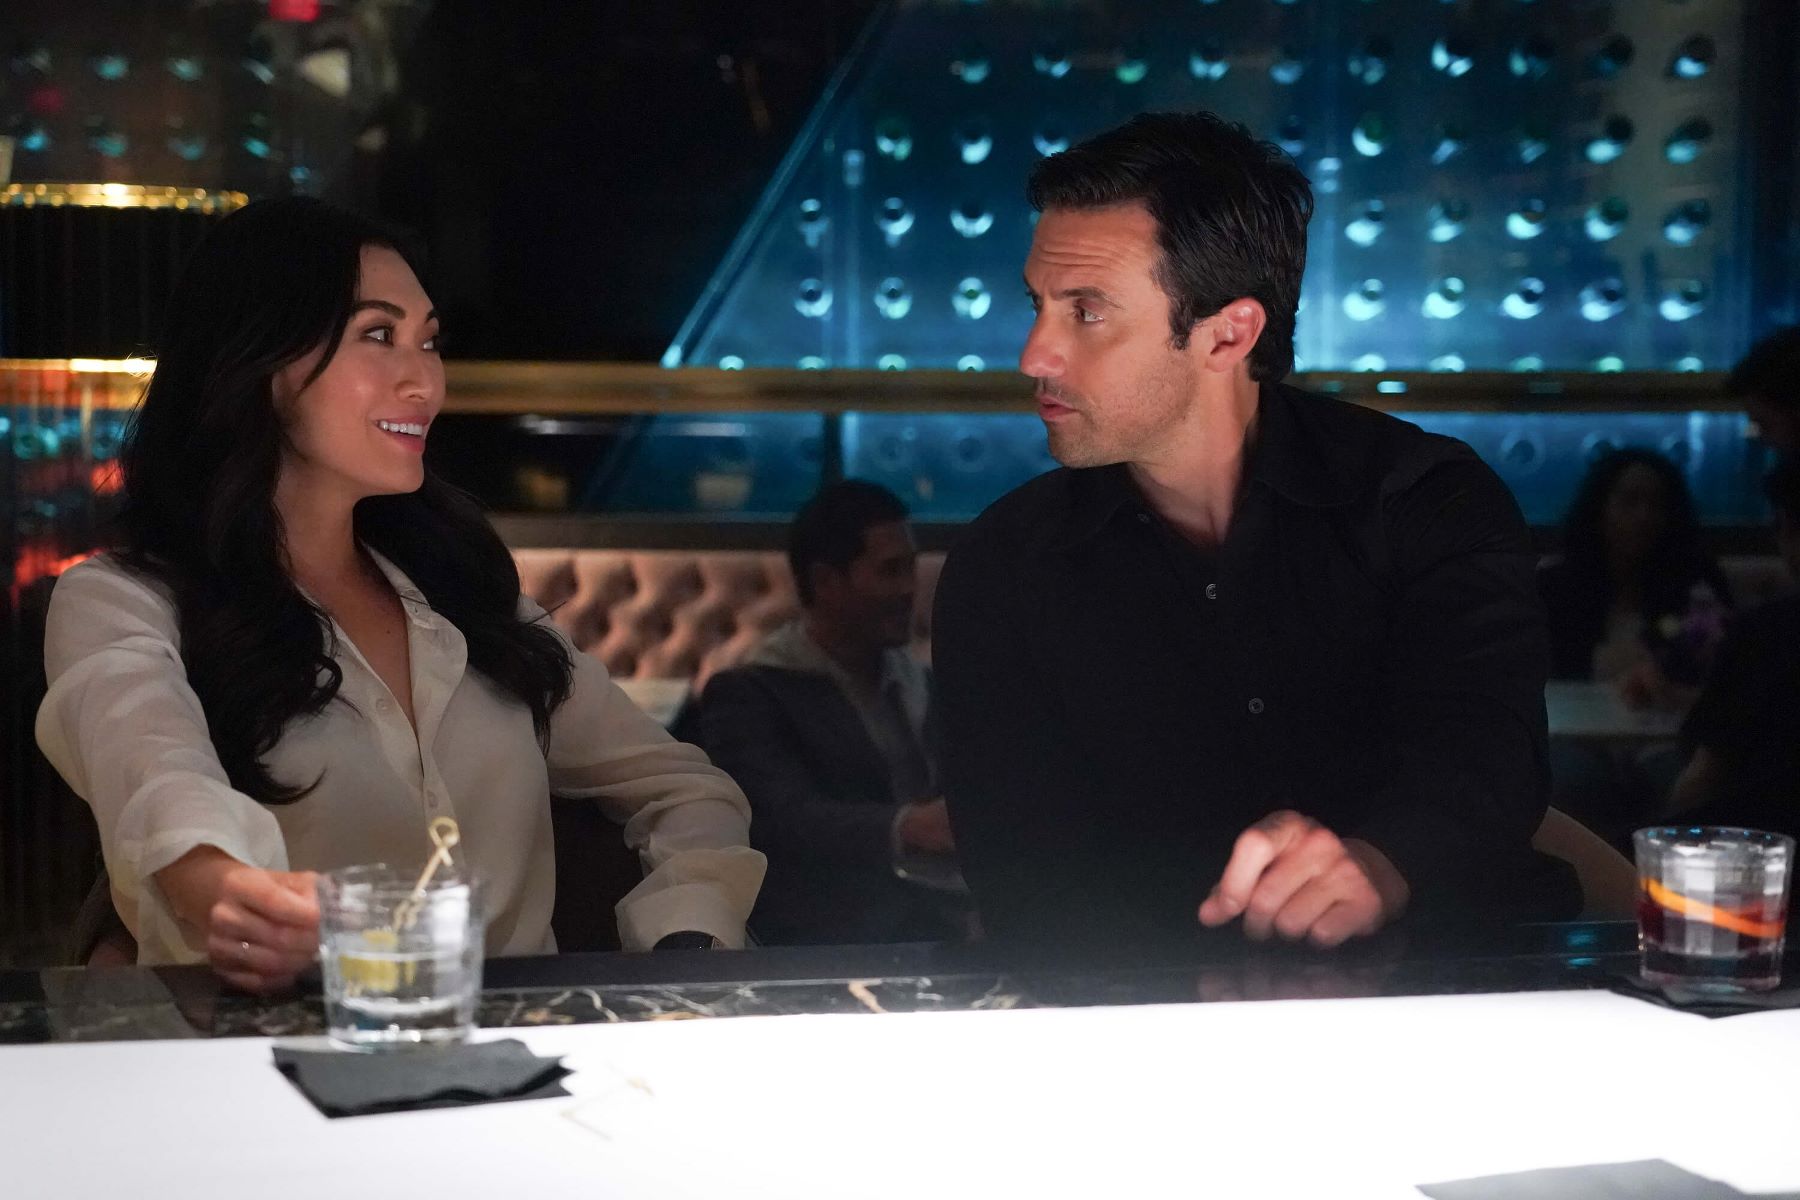 Catherine Haena Kim and Milo Ventimiglia, in character as Emma and Charlie in 'The Company You Keep' Season 1 Episode 1, share a scene at a bar. Emma wears a white long-sleeved button-up shirt. Charlie wears a black long-sleeved button-up shirt.